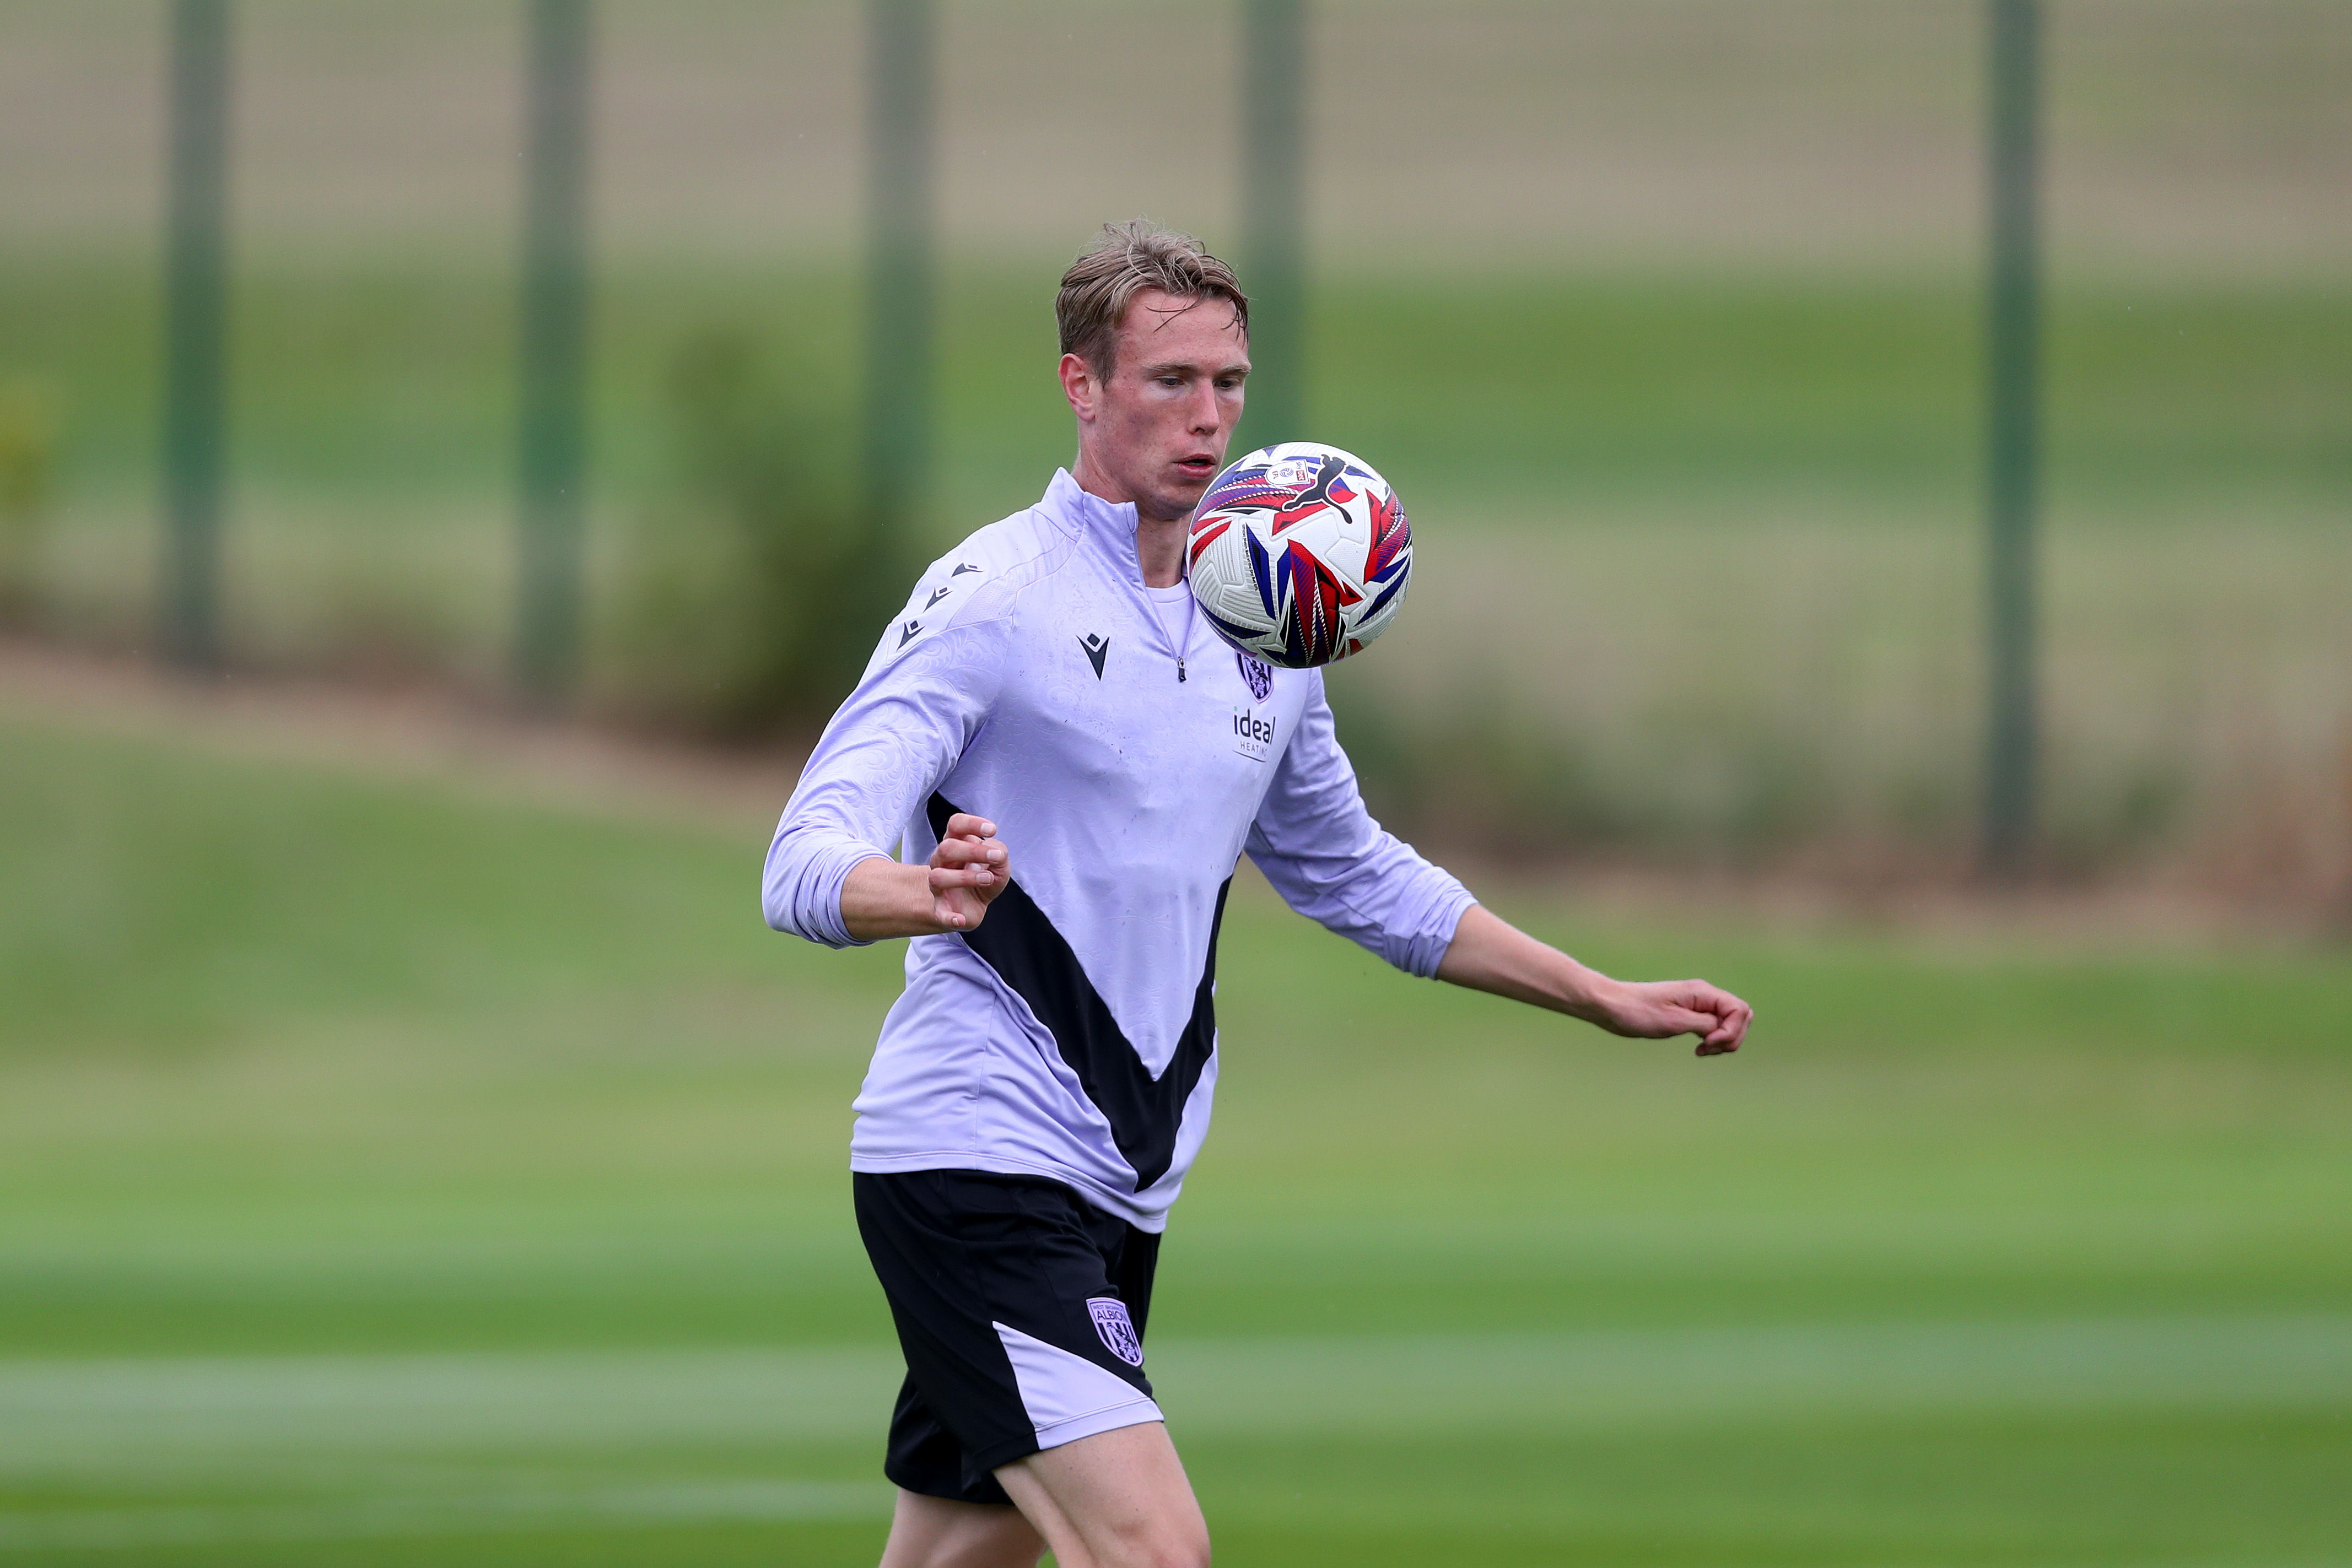 Torbjørn Heggem controlling a ball with his chest during training 